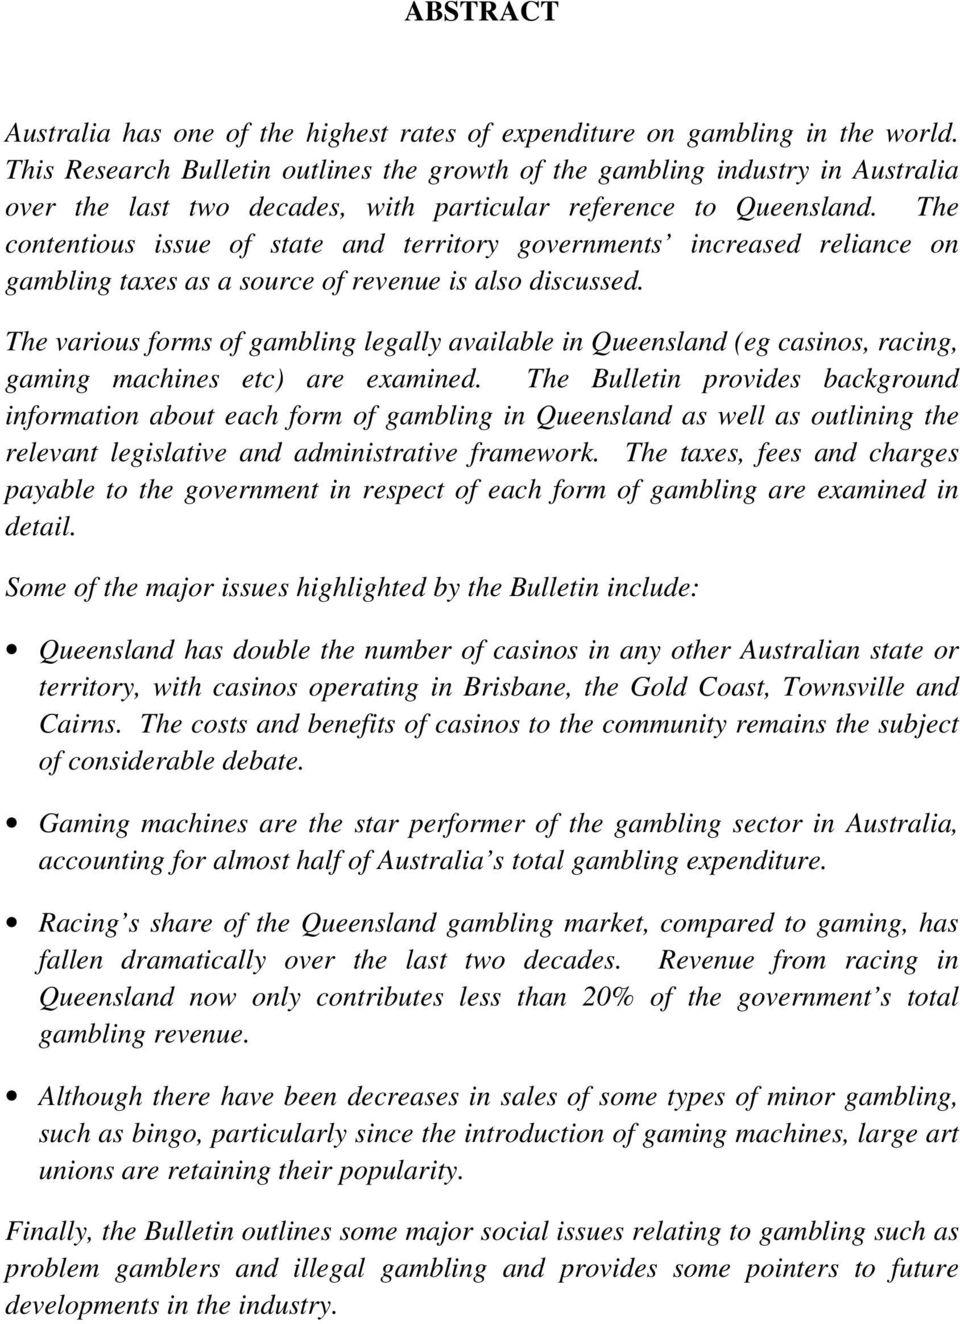 The contentious issue of state and territory governments increased reliance on gambling taxes as a source of revenue is also discussed.